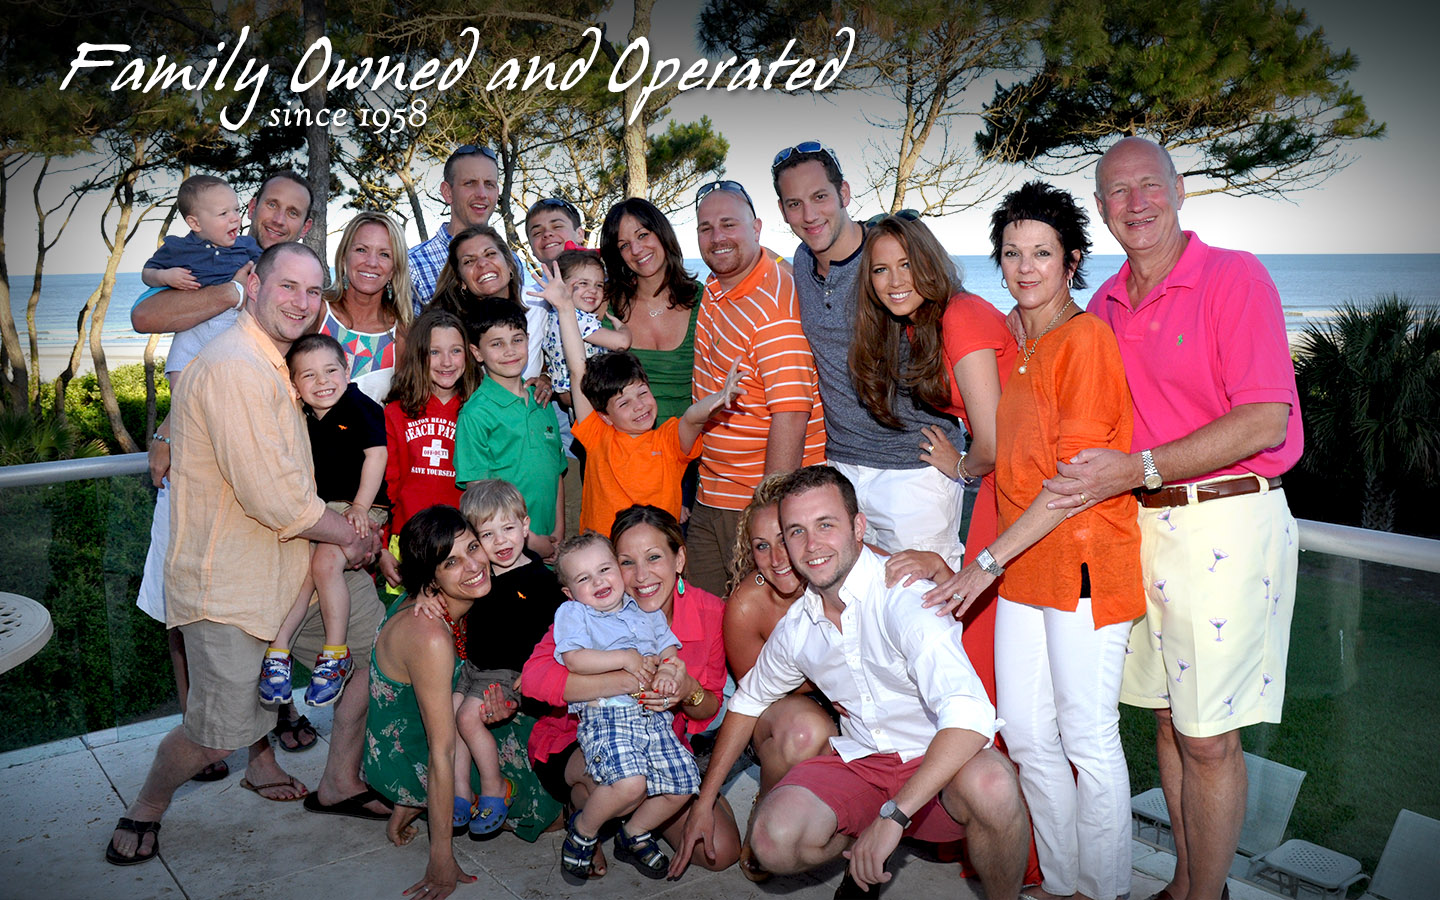 Large family photo. Text: Family owned and operated since 1958.